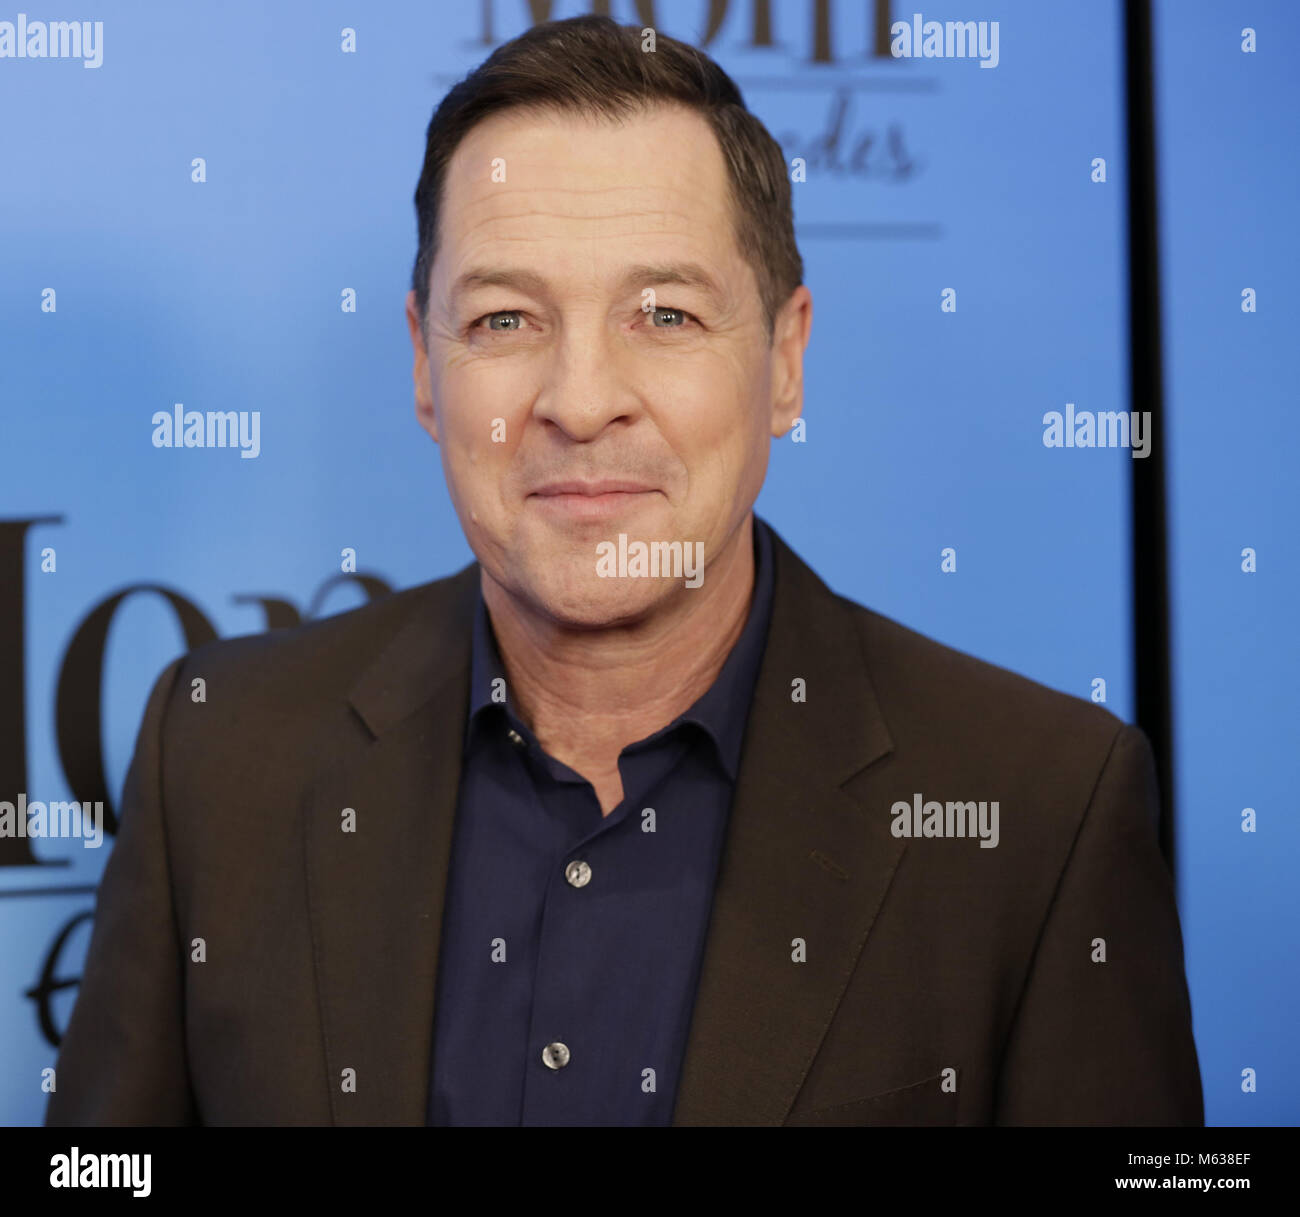 Celebrities attend CBS And Warner Bros. Television's 'Mom' Celebrates 100 Episodes at TAO Hollywood.  Featuring: French Stewart Where: Los Angeles, California, United States When: 28 Jan 2018 Credit: Brian To/WENN.com Stock Photo